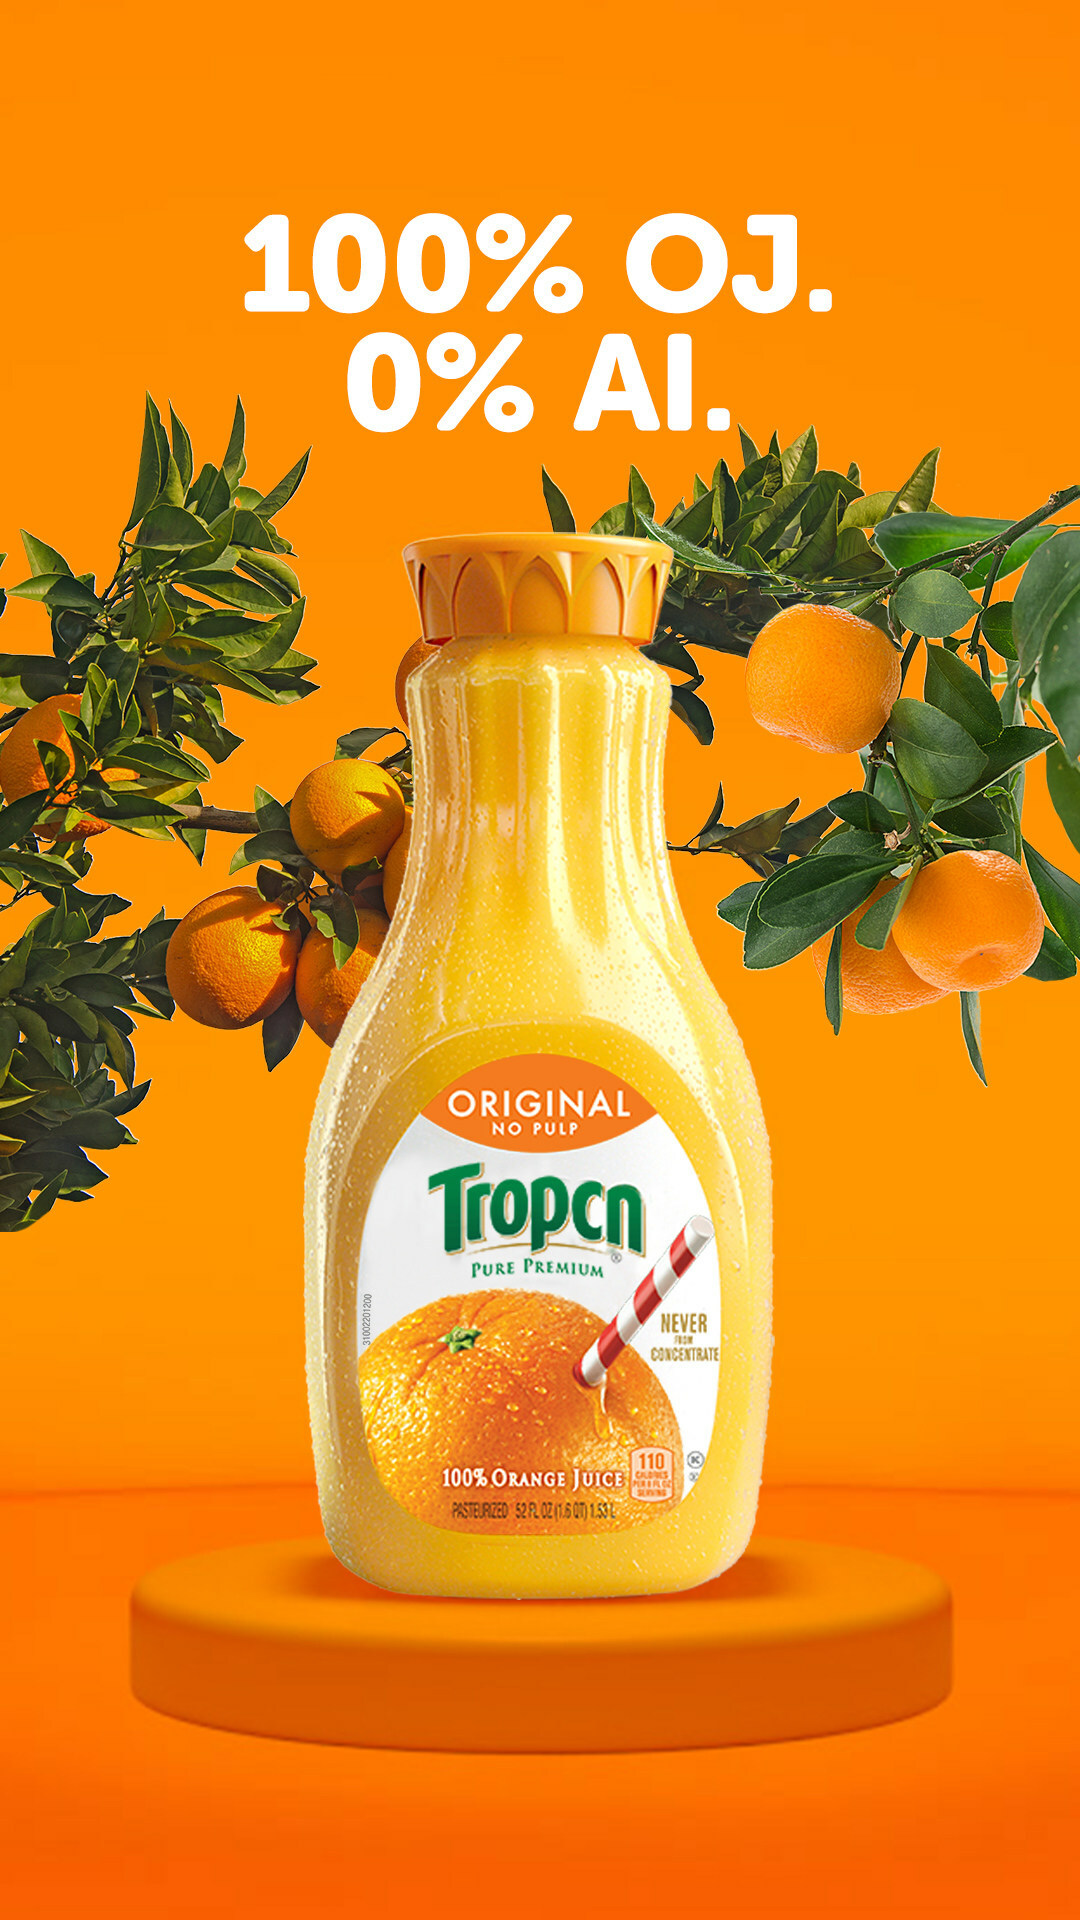 “Artificial Just Isn’t in Our DNA” Tropicana Goes Without the Letters “AI”